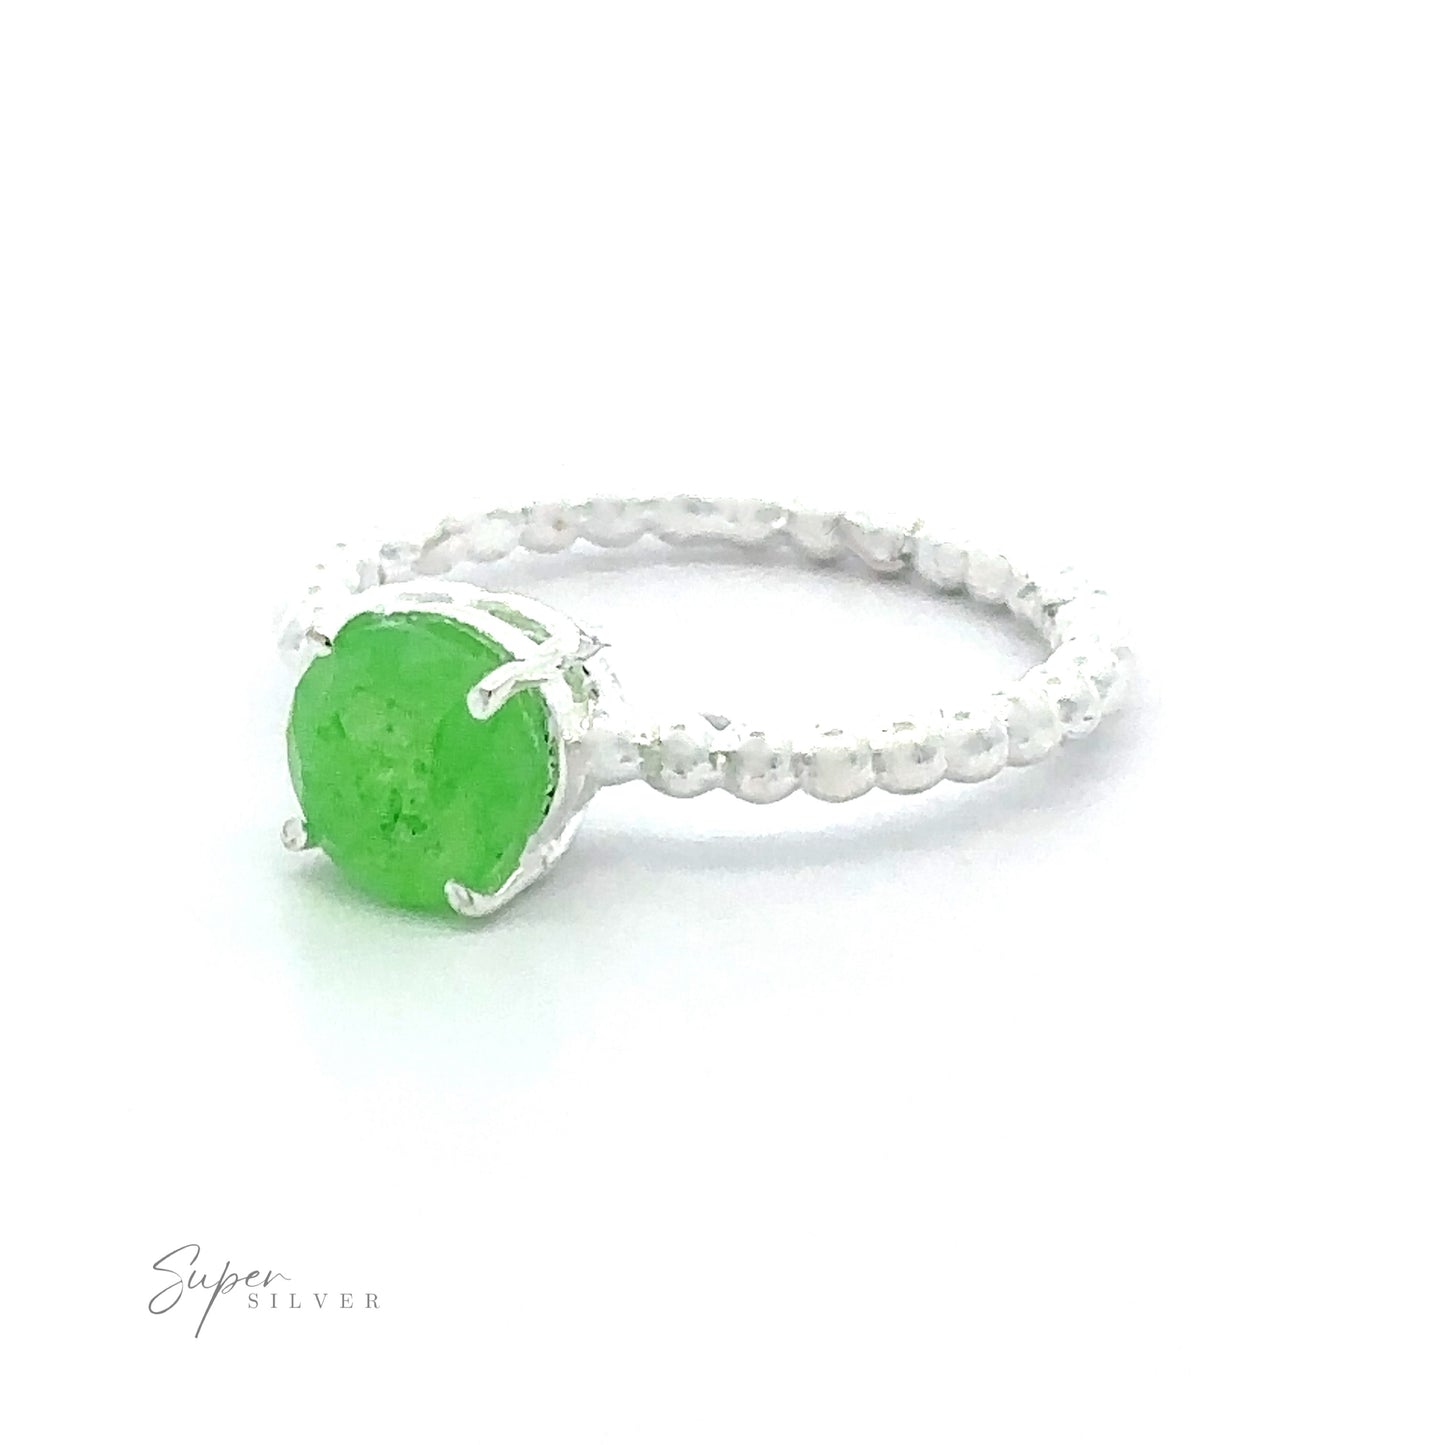 
                  
                    Stunning Circular Gemstone Ring with Beaded Band Small Sizes with a vibrant green oval gemstone on a white background.
                  
                